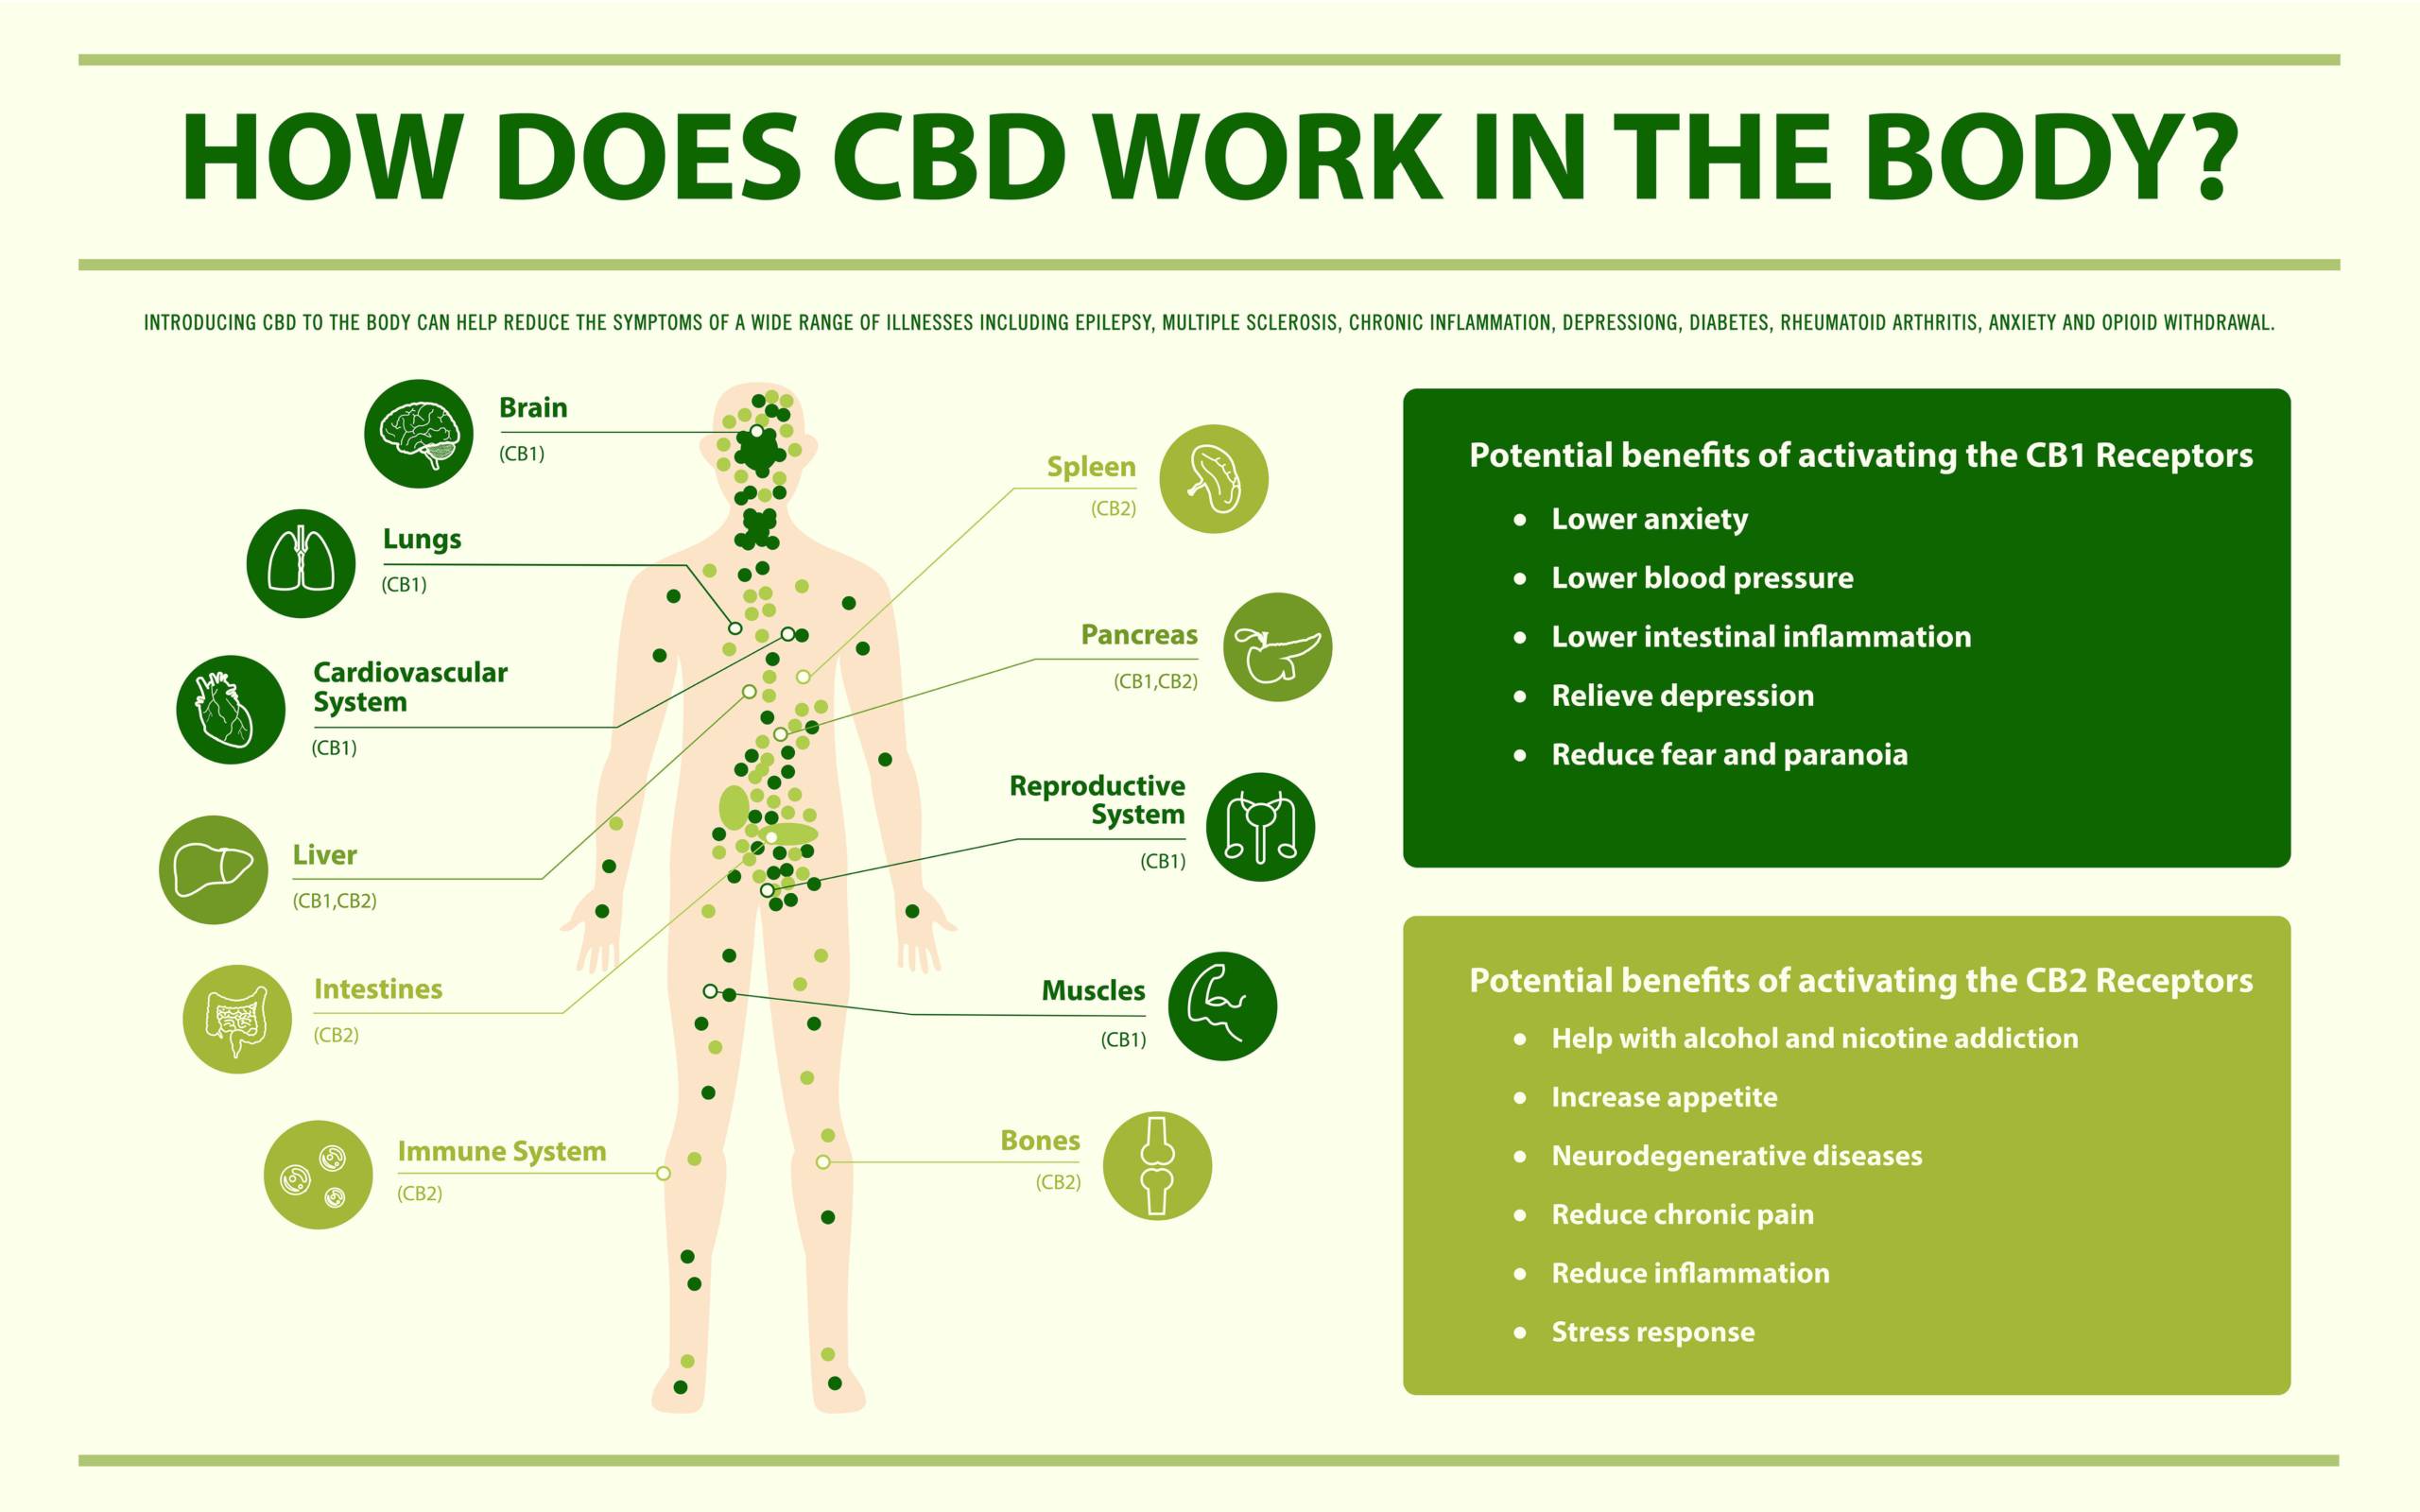 How CBD Works In the Body infographic and the CBD health benefits. Speed Greens.